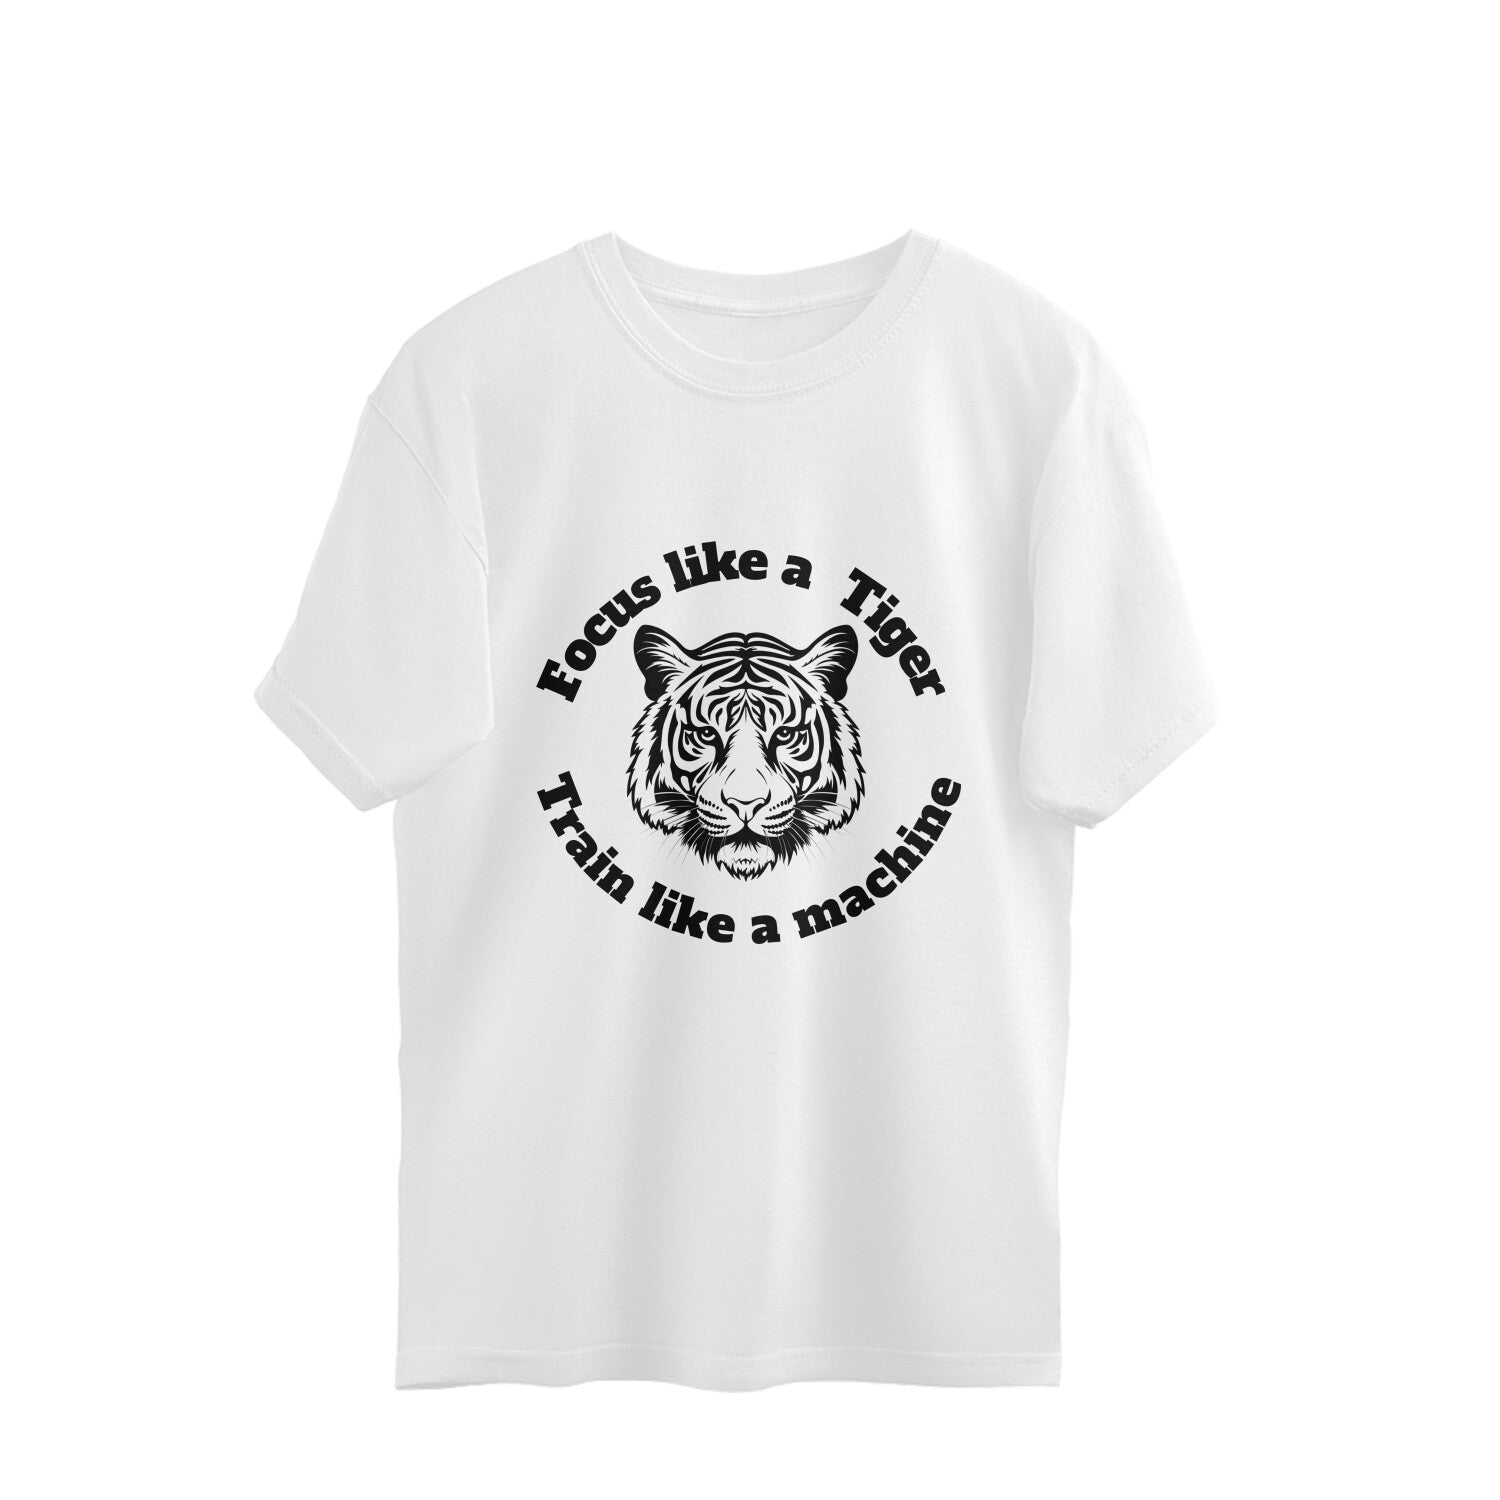 Focus like a tiger Oversized Tee